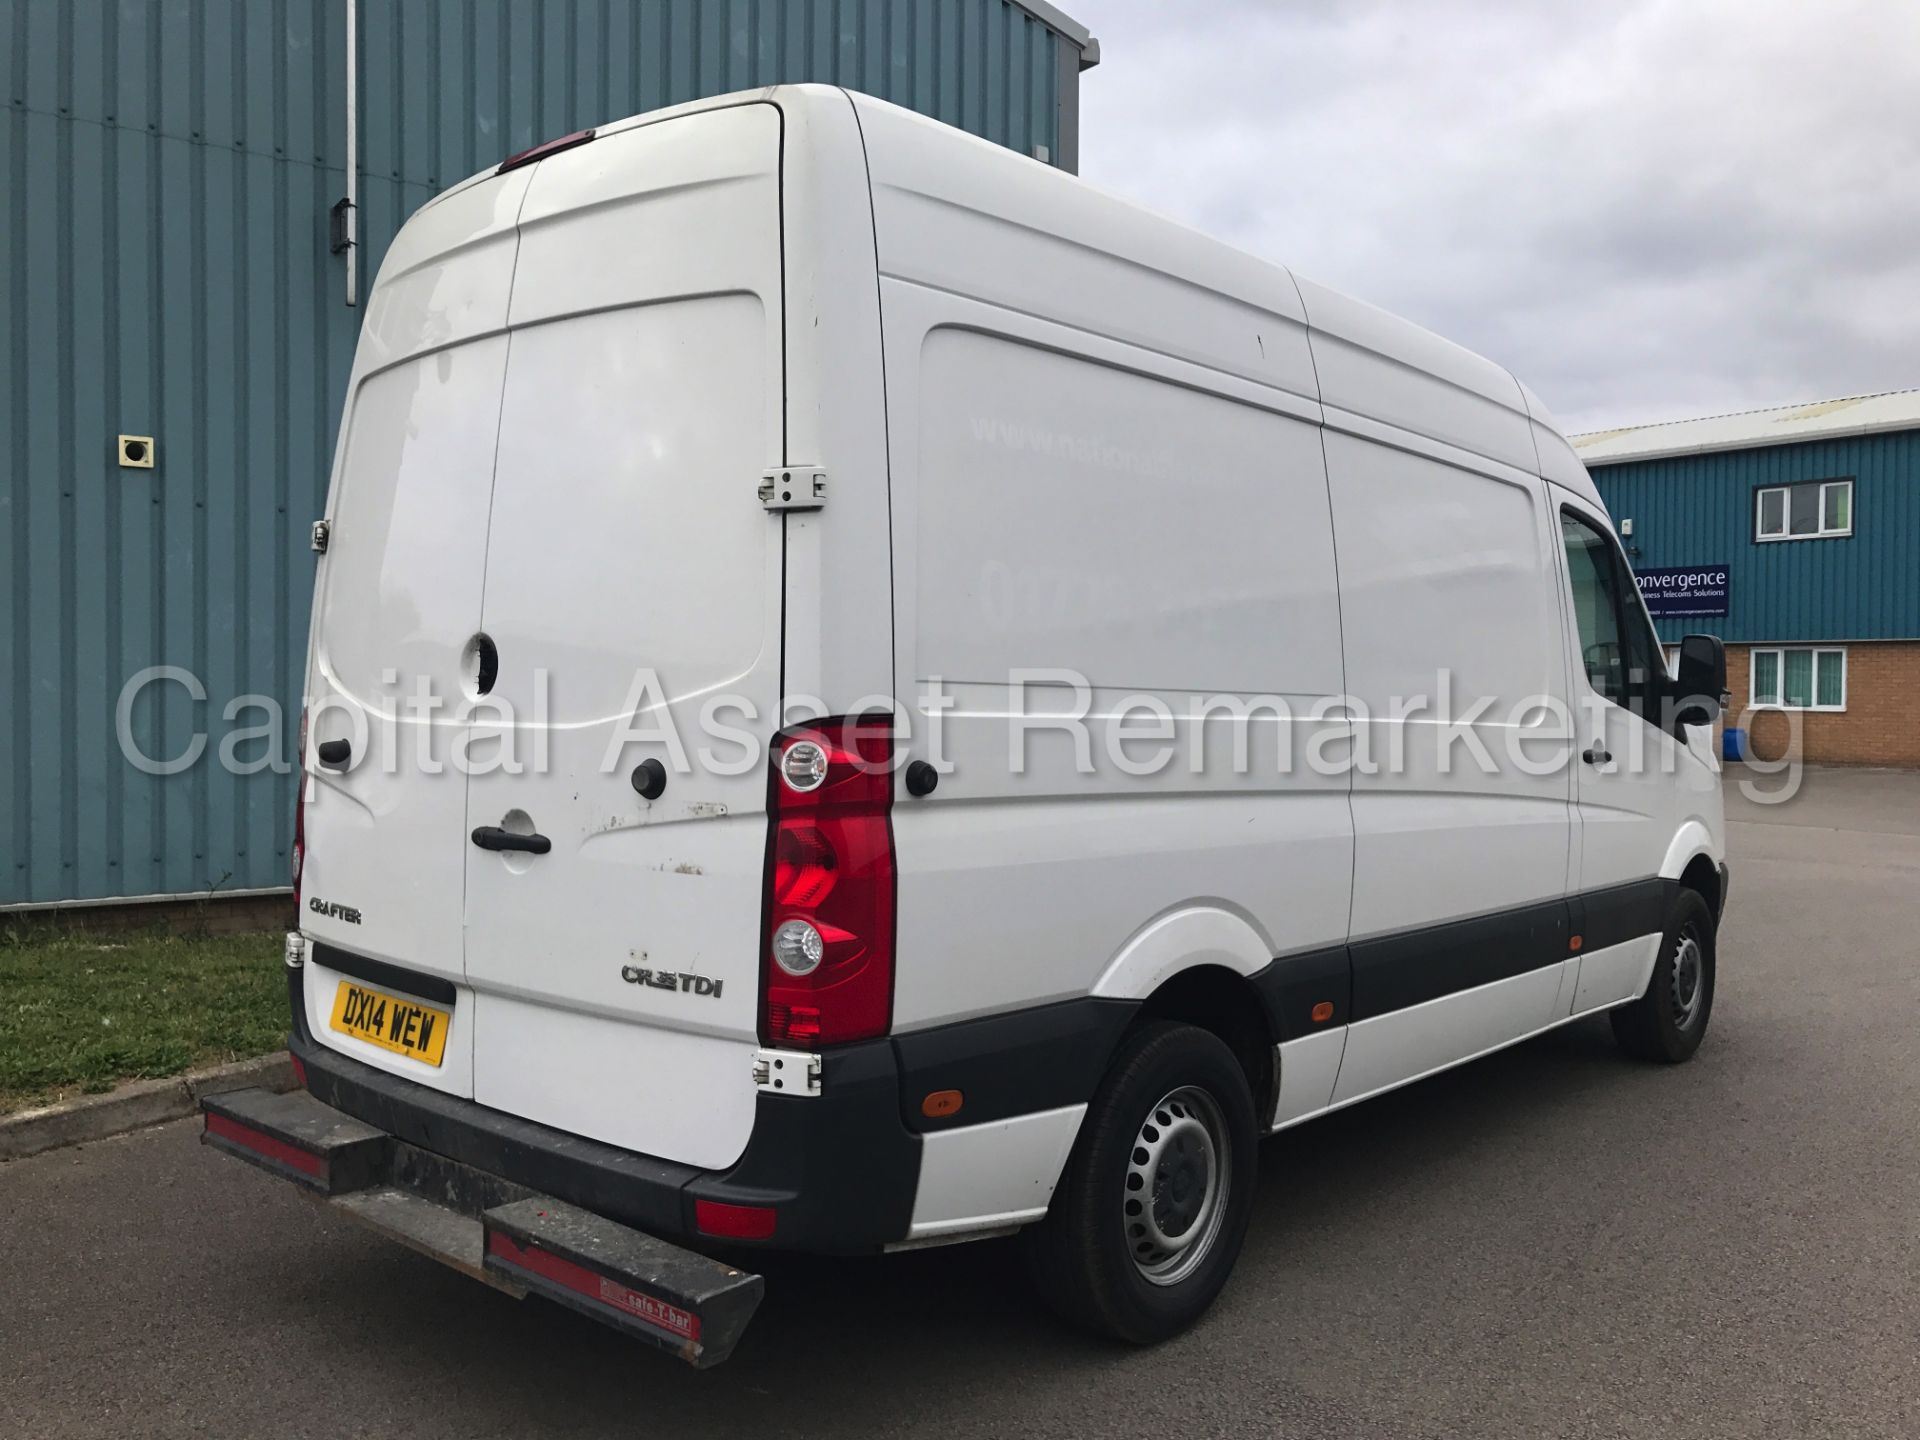 VOLKSWAGEN CRAFTER CR35 'MWB HI-ROOF' (2014) '2.0 TDI - 109 PS - 6 SPEED' *1 COMPANY OWNER FROM NEW* - Image 9 of 19